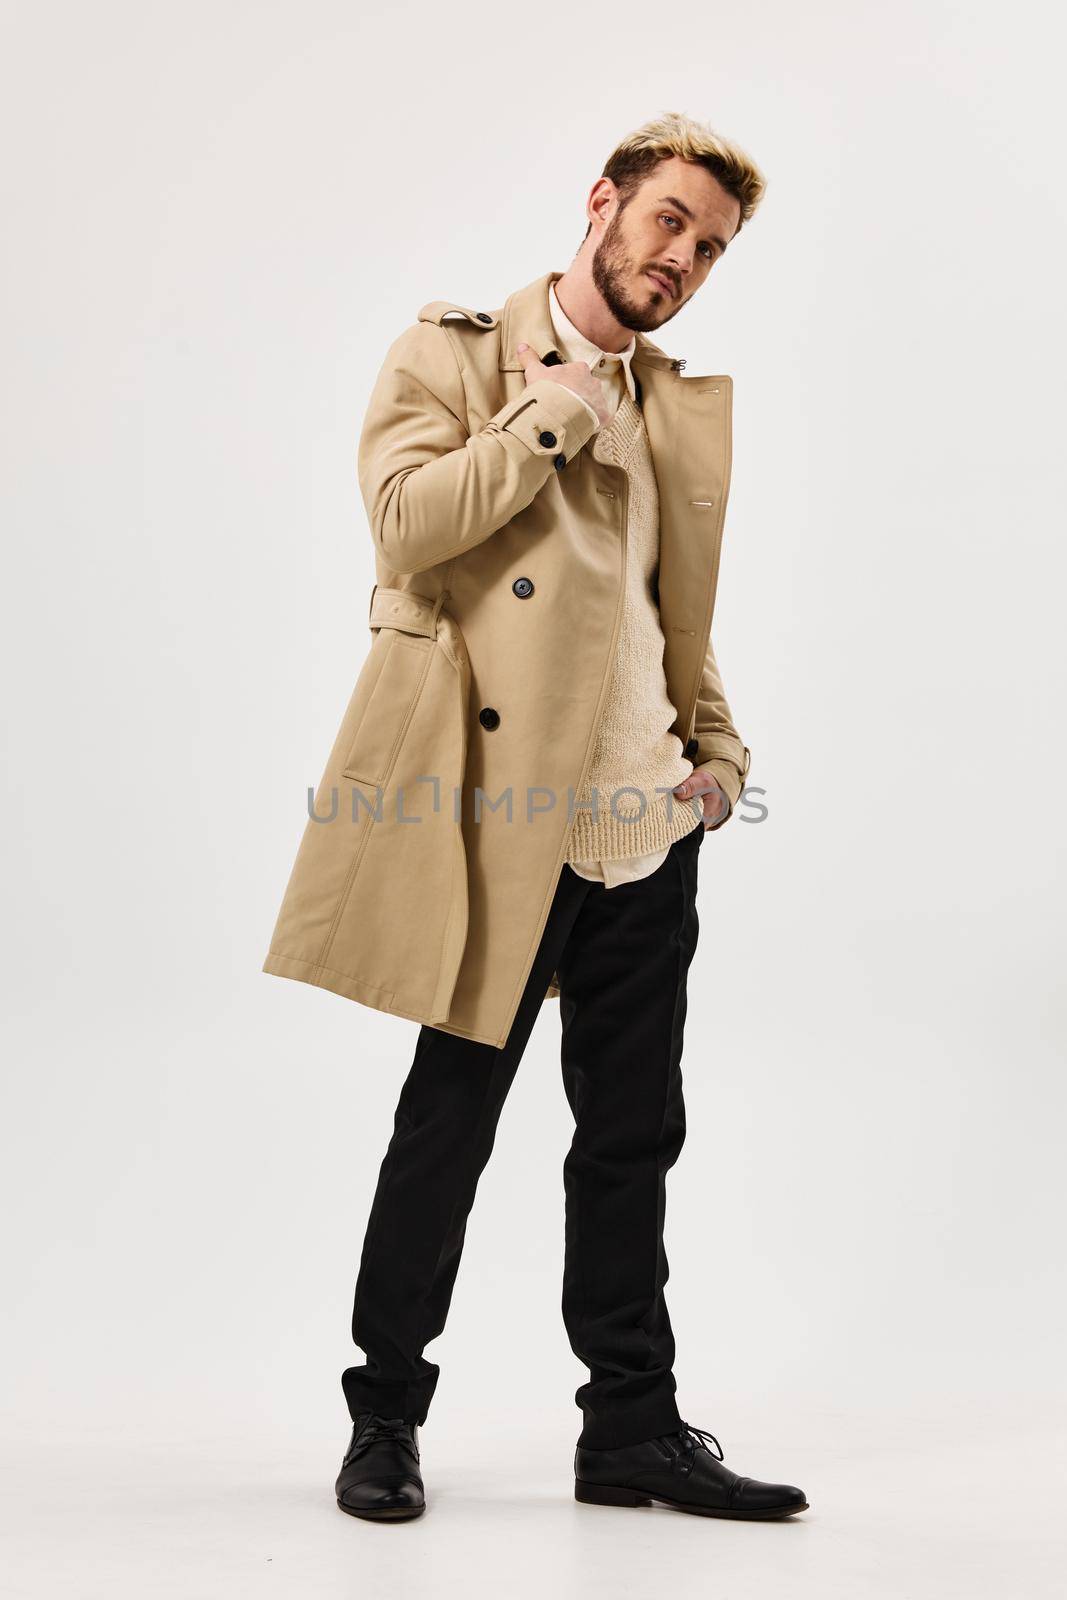 man in beige coat autumn style studio full growth side view by SHOTPRIME